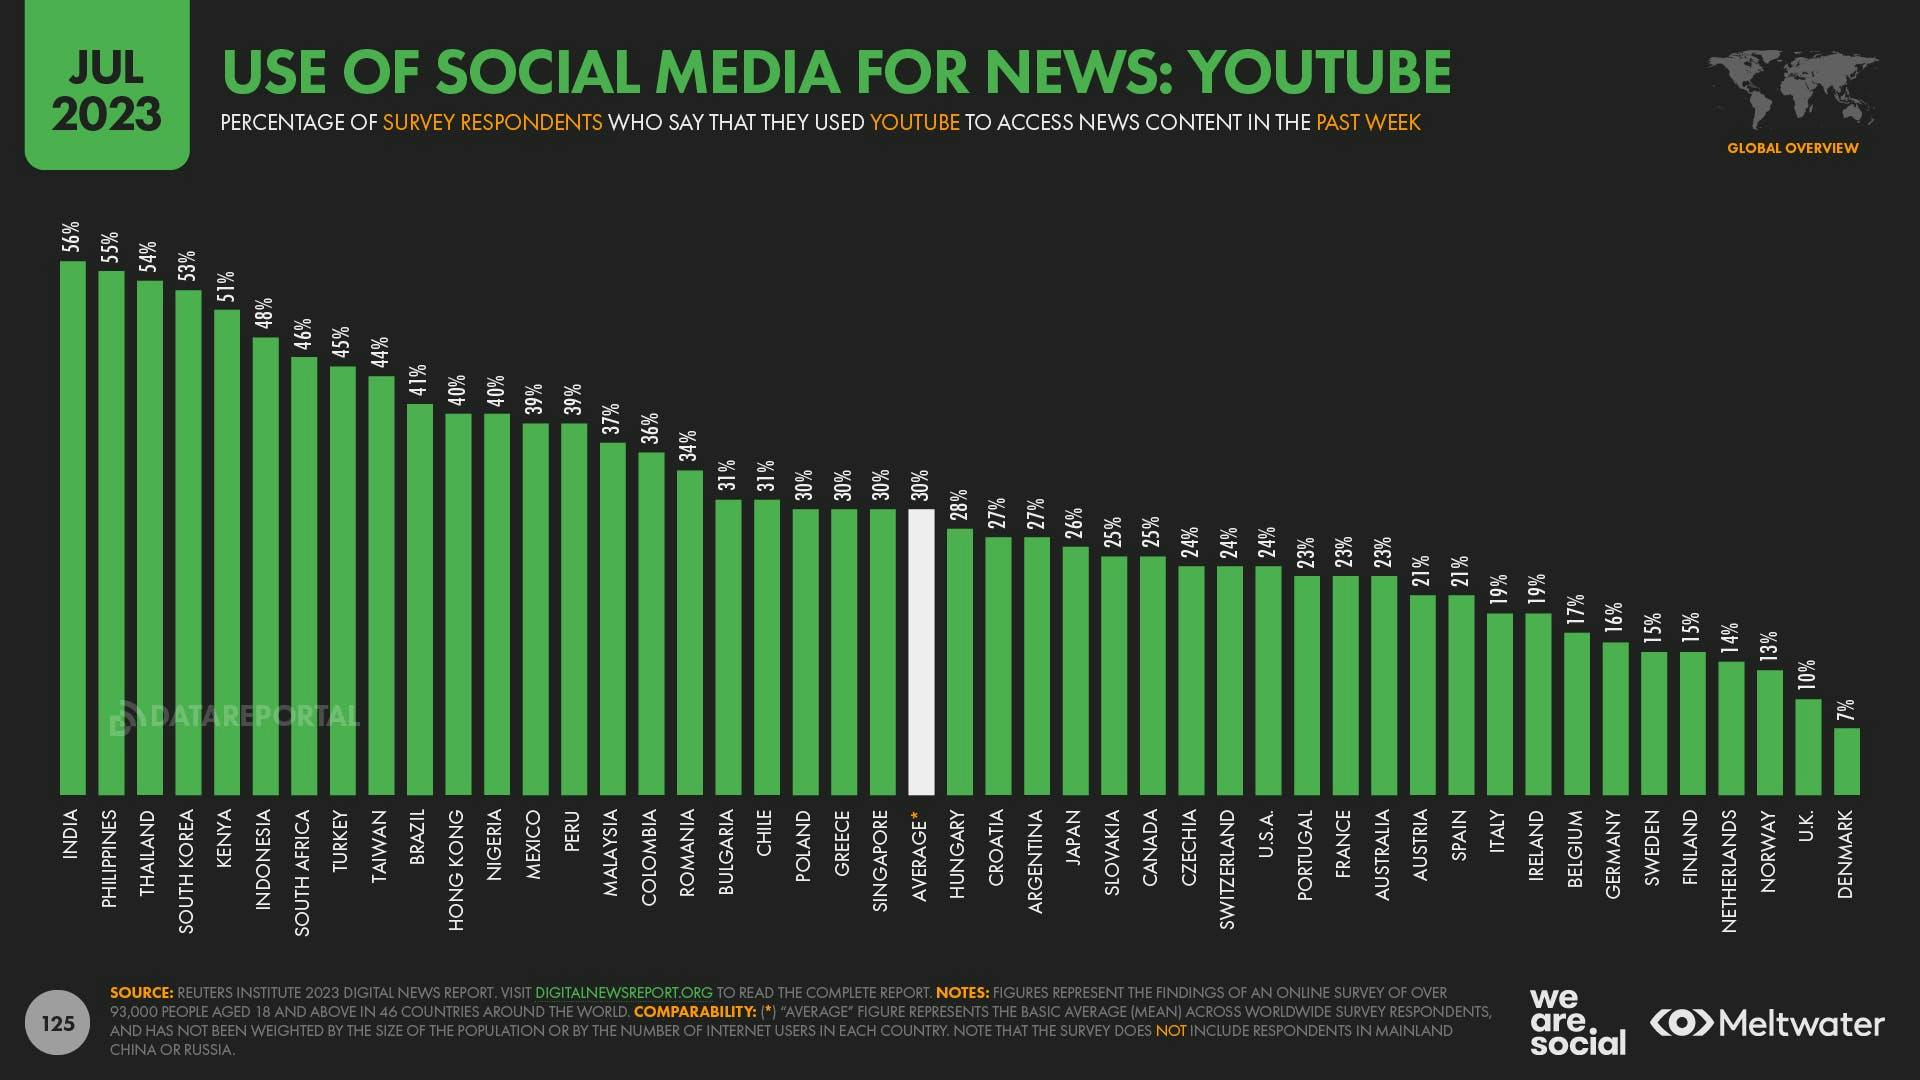 A bar chart showing use of YouTube for news across nations with a global average of 30%, according to RISJ survey data.